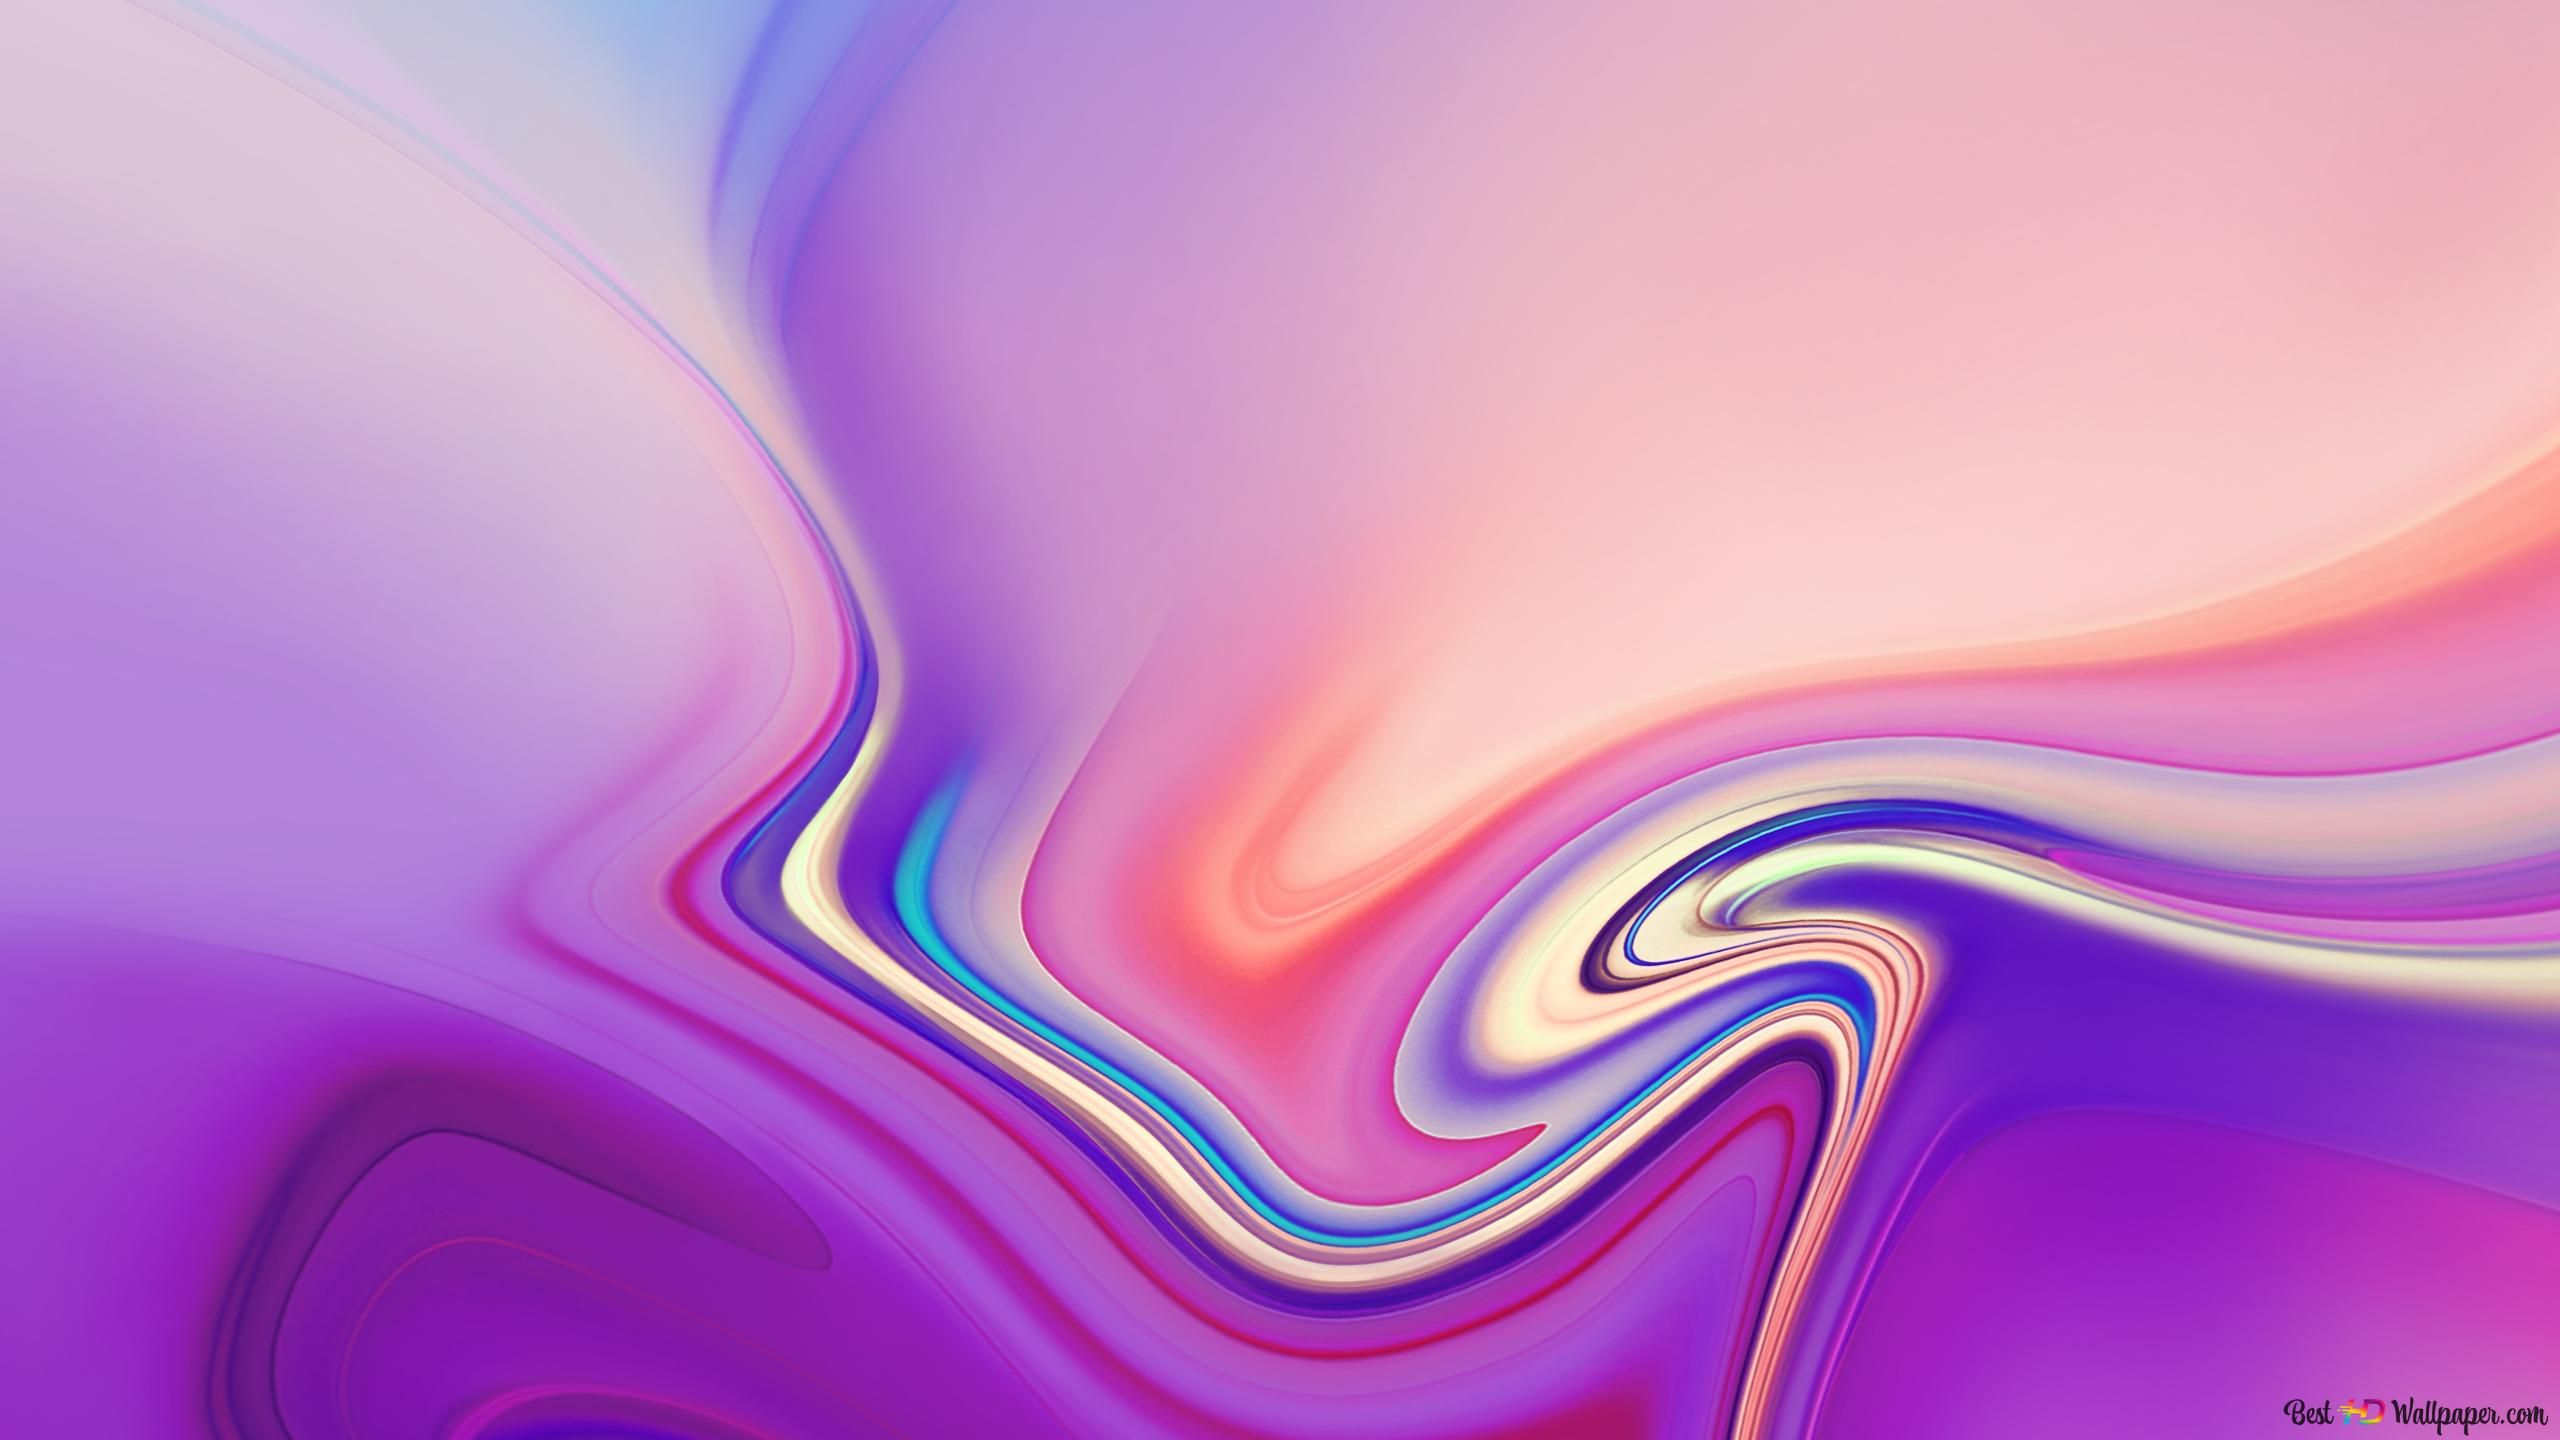 A purple and pink abstract artwork - 2560x1440, Chromebook